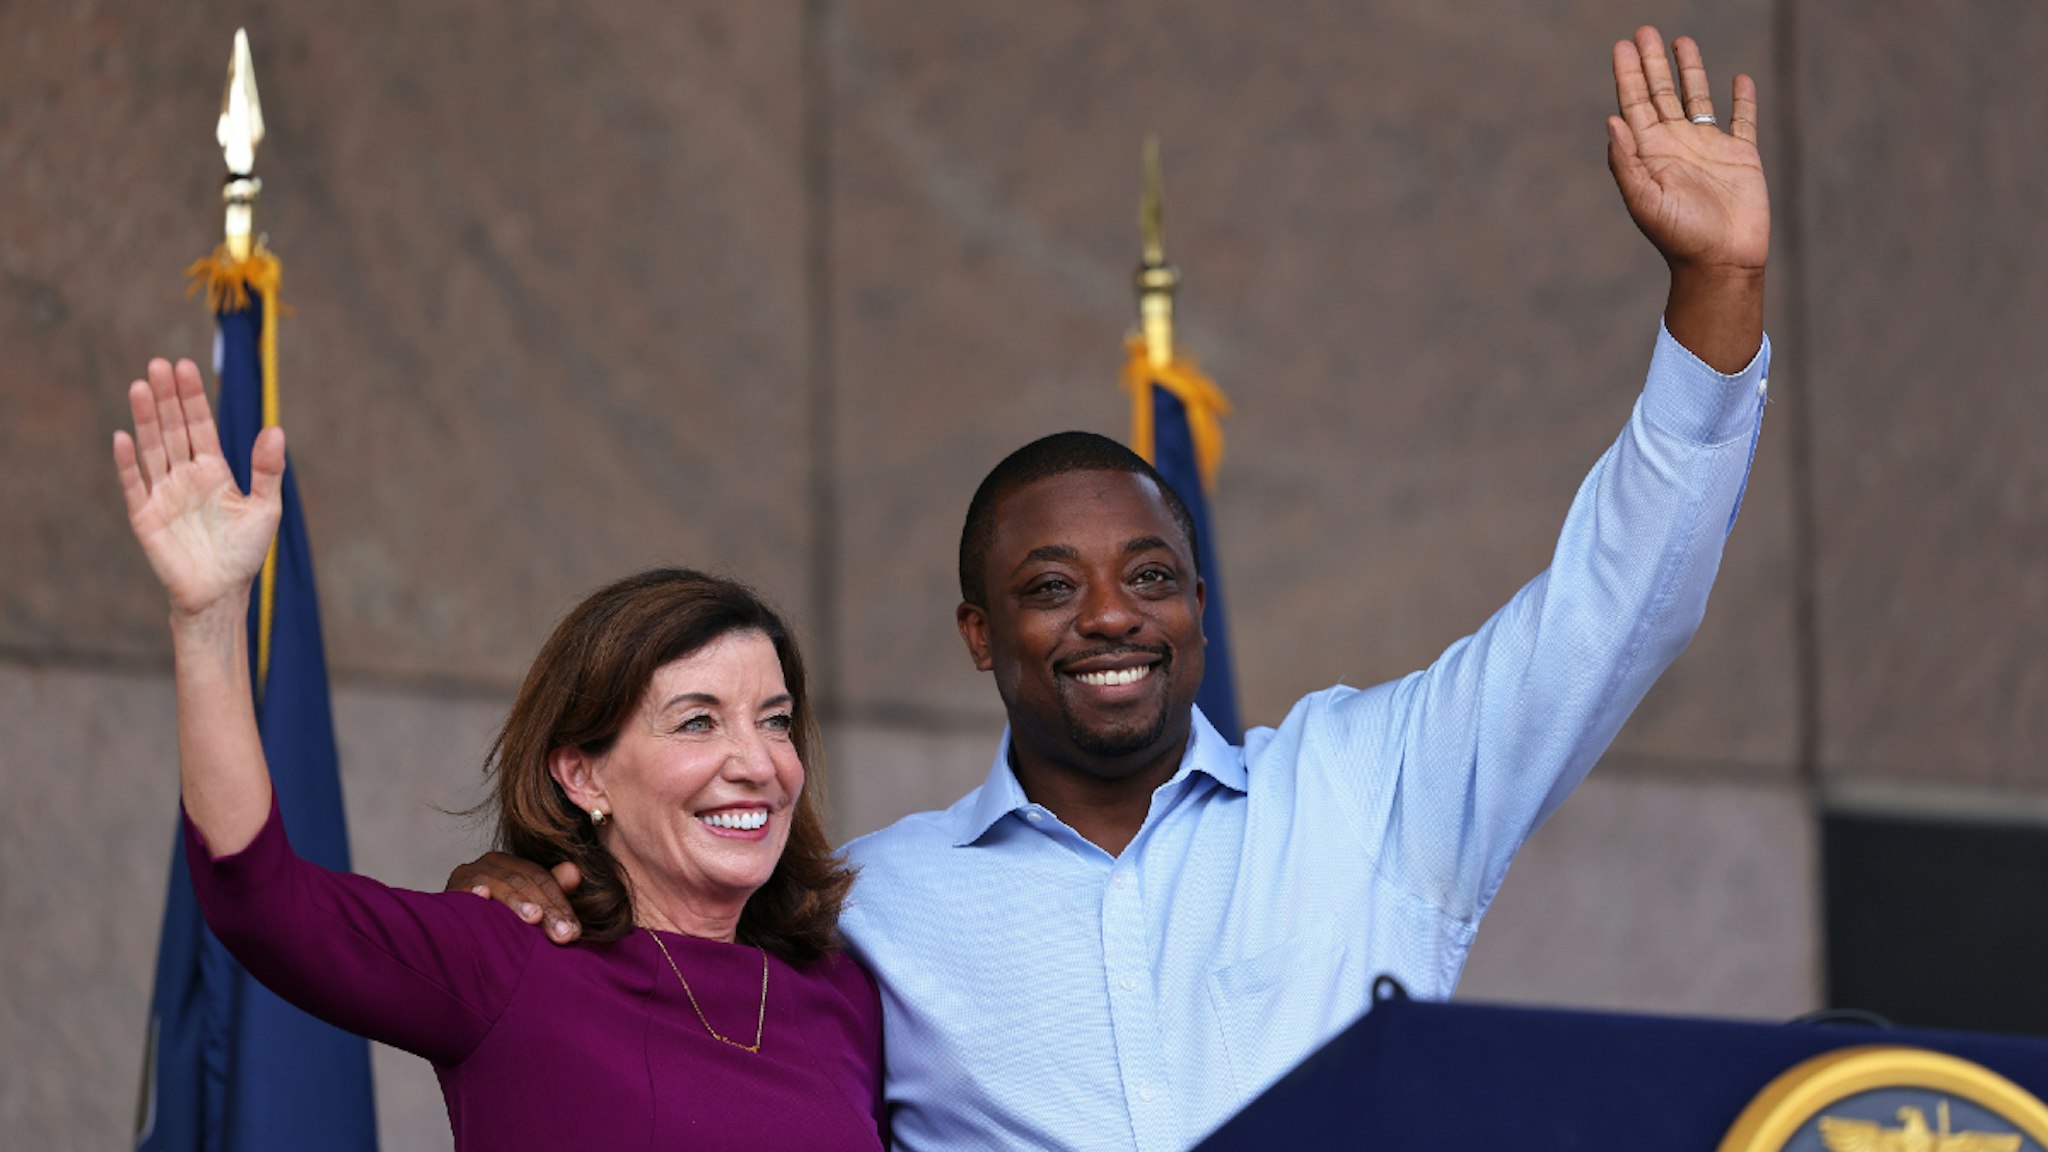 NEW YORK, NEW YORK - AUGUST 26: New York Gov. Kathy Hochul and State Senator Brian Benjamin wave at the crowd during a press conference announcing him as her Lt. Governor on August 26, 2021 in New York City. Senator Benjamin, who placed fourth in the Democratic primary for city comptroller earlier this year, will replace Hochul who was sworn in as Governor this week after the resignation of former Gov. Andrew Cuomo. Senator Benjamin has been a lead sponsor and advocate for criminal and police reforms that includes the Eric Garner Anti-Chokehold Act and the Less is More Act, which restricts the use of incarceration for non-criminal technical parole violations. He has also been a proponent of affordable housing.